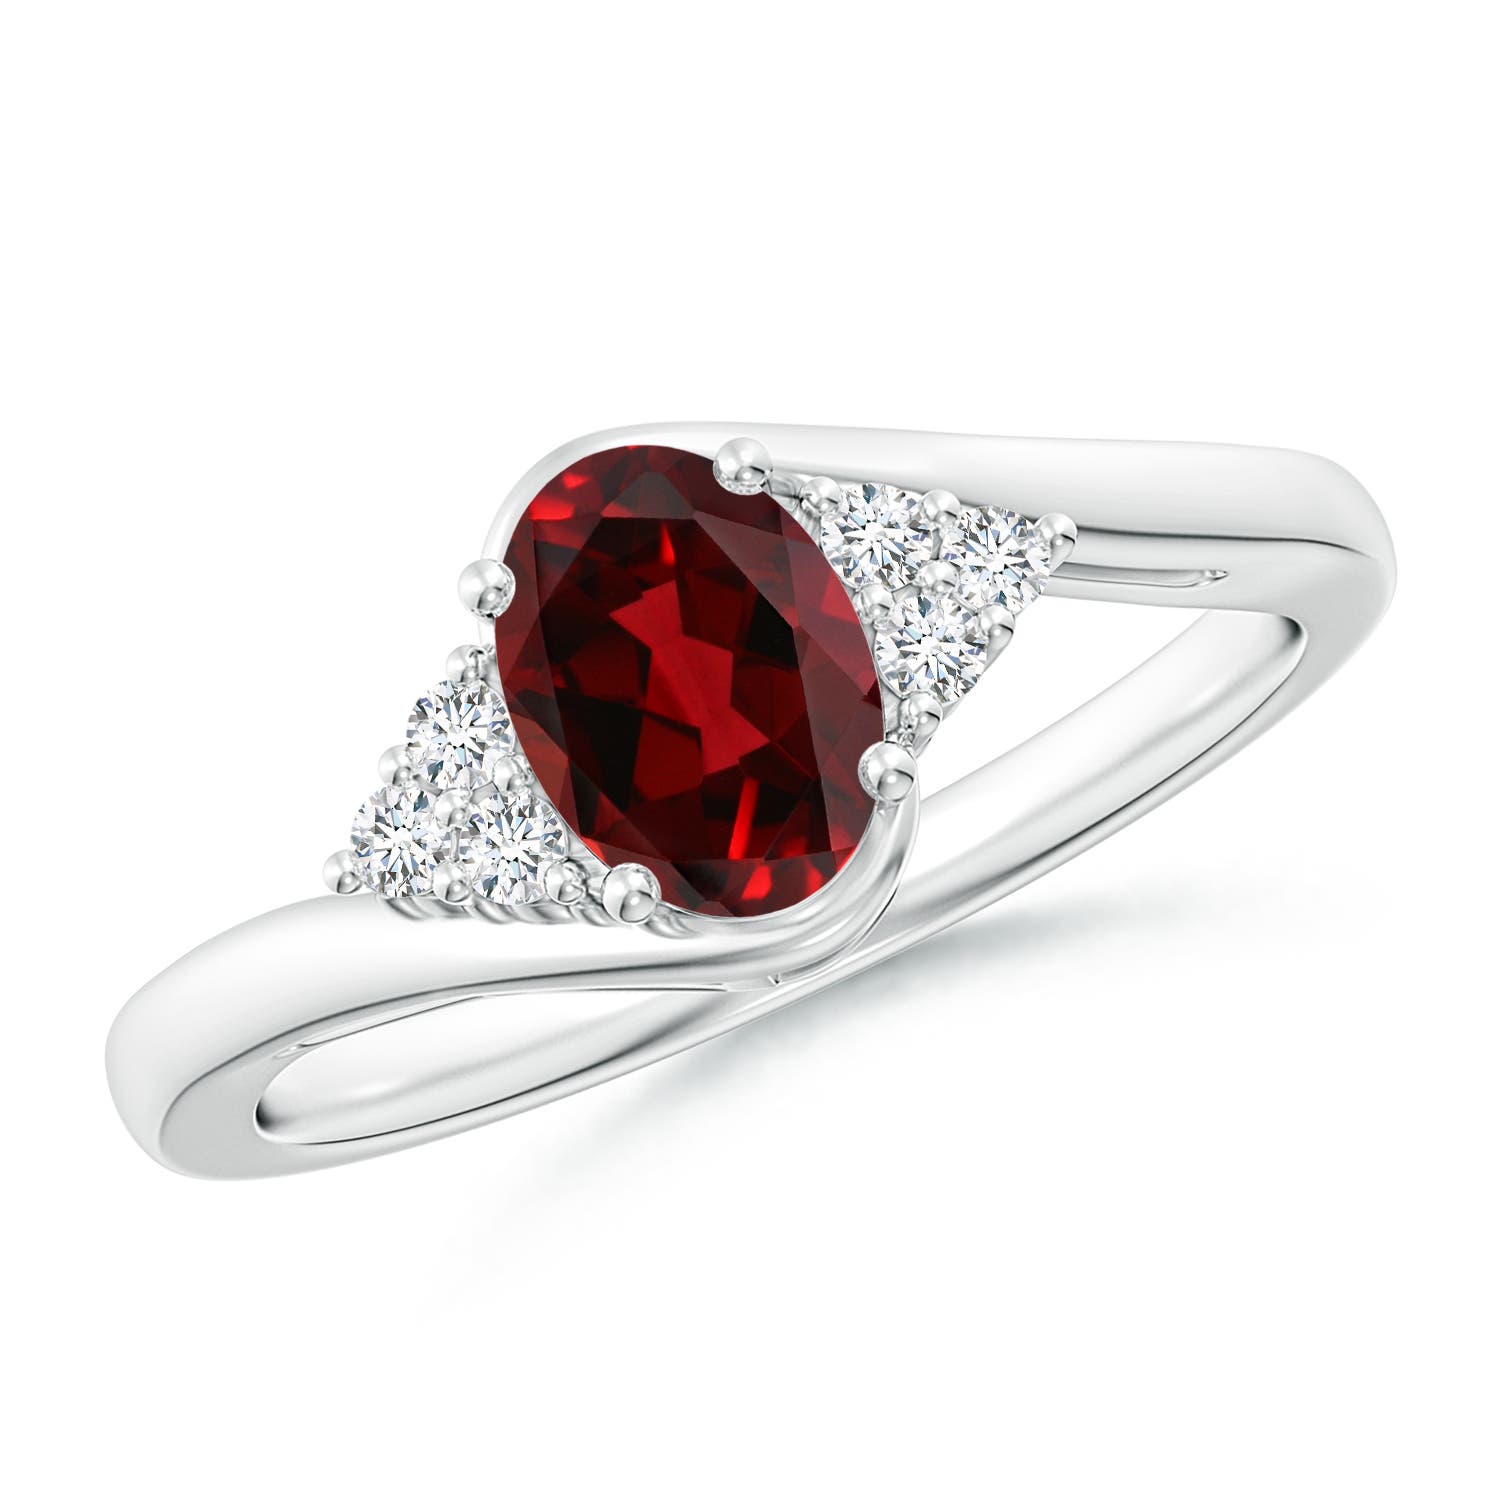 Oval Garnet Bypass Ring with Trio Diamond Accents